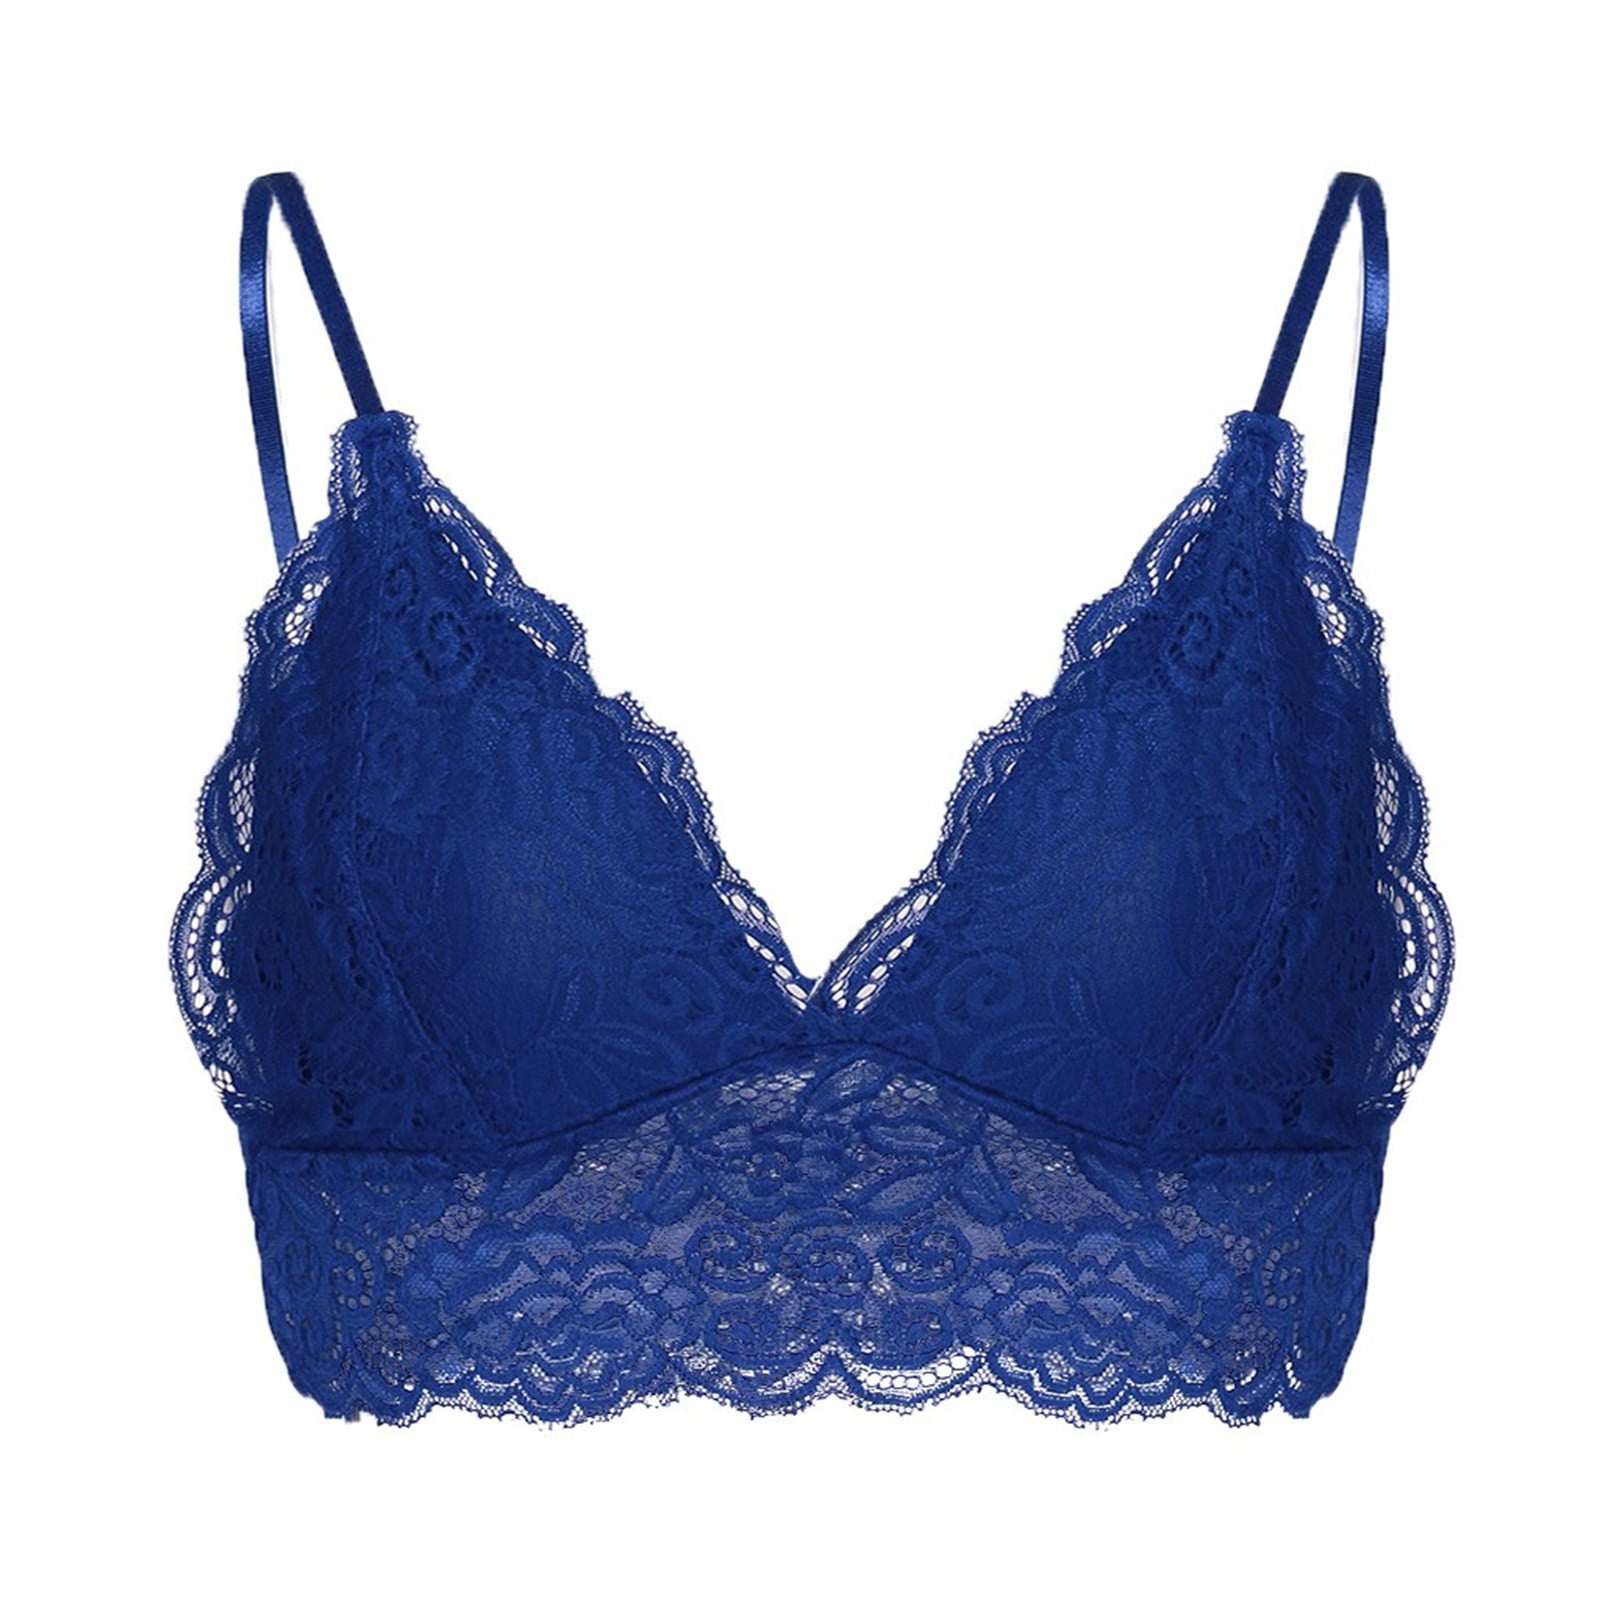 New NWT Aerie Blue Lace Floral Cute Sexy Padded Wireless Bra M